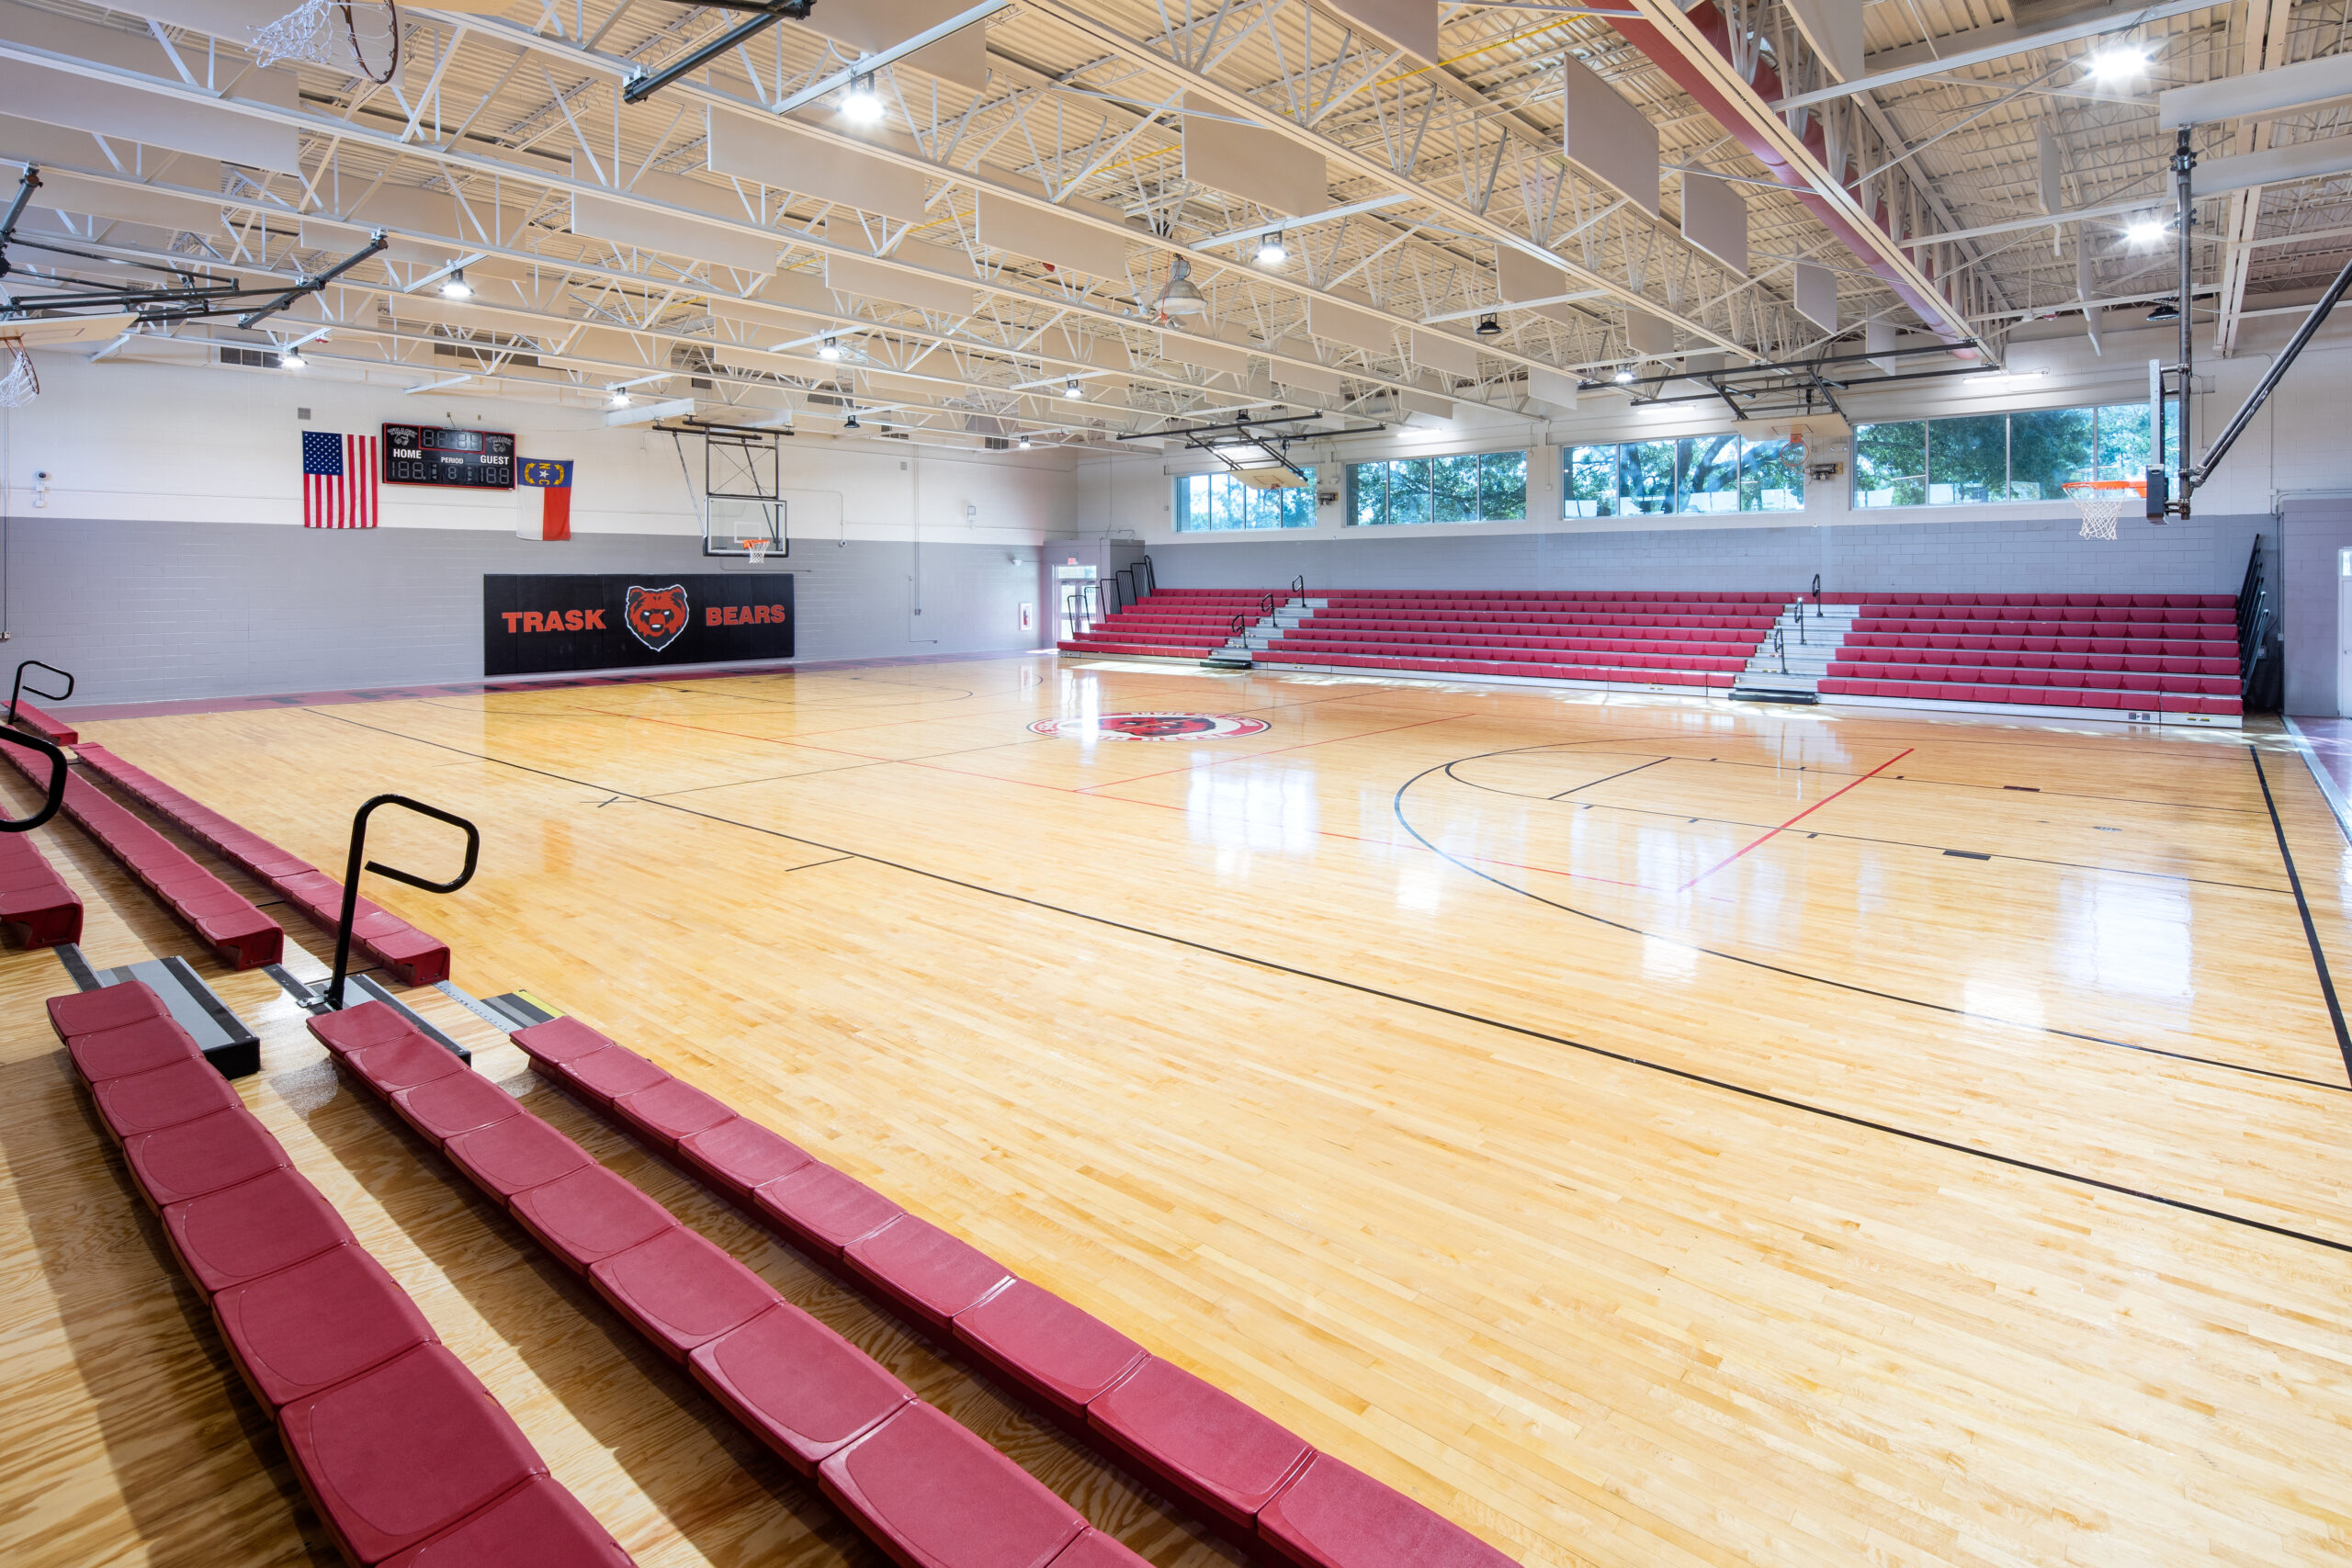 Trask Middle School Gymnasium with Bleachers and Basketball Court